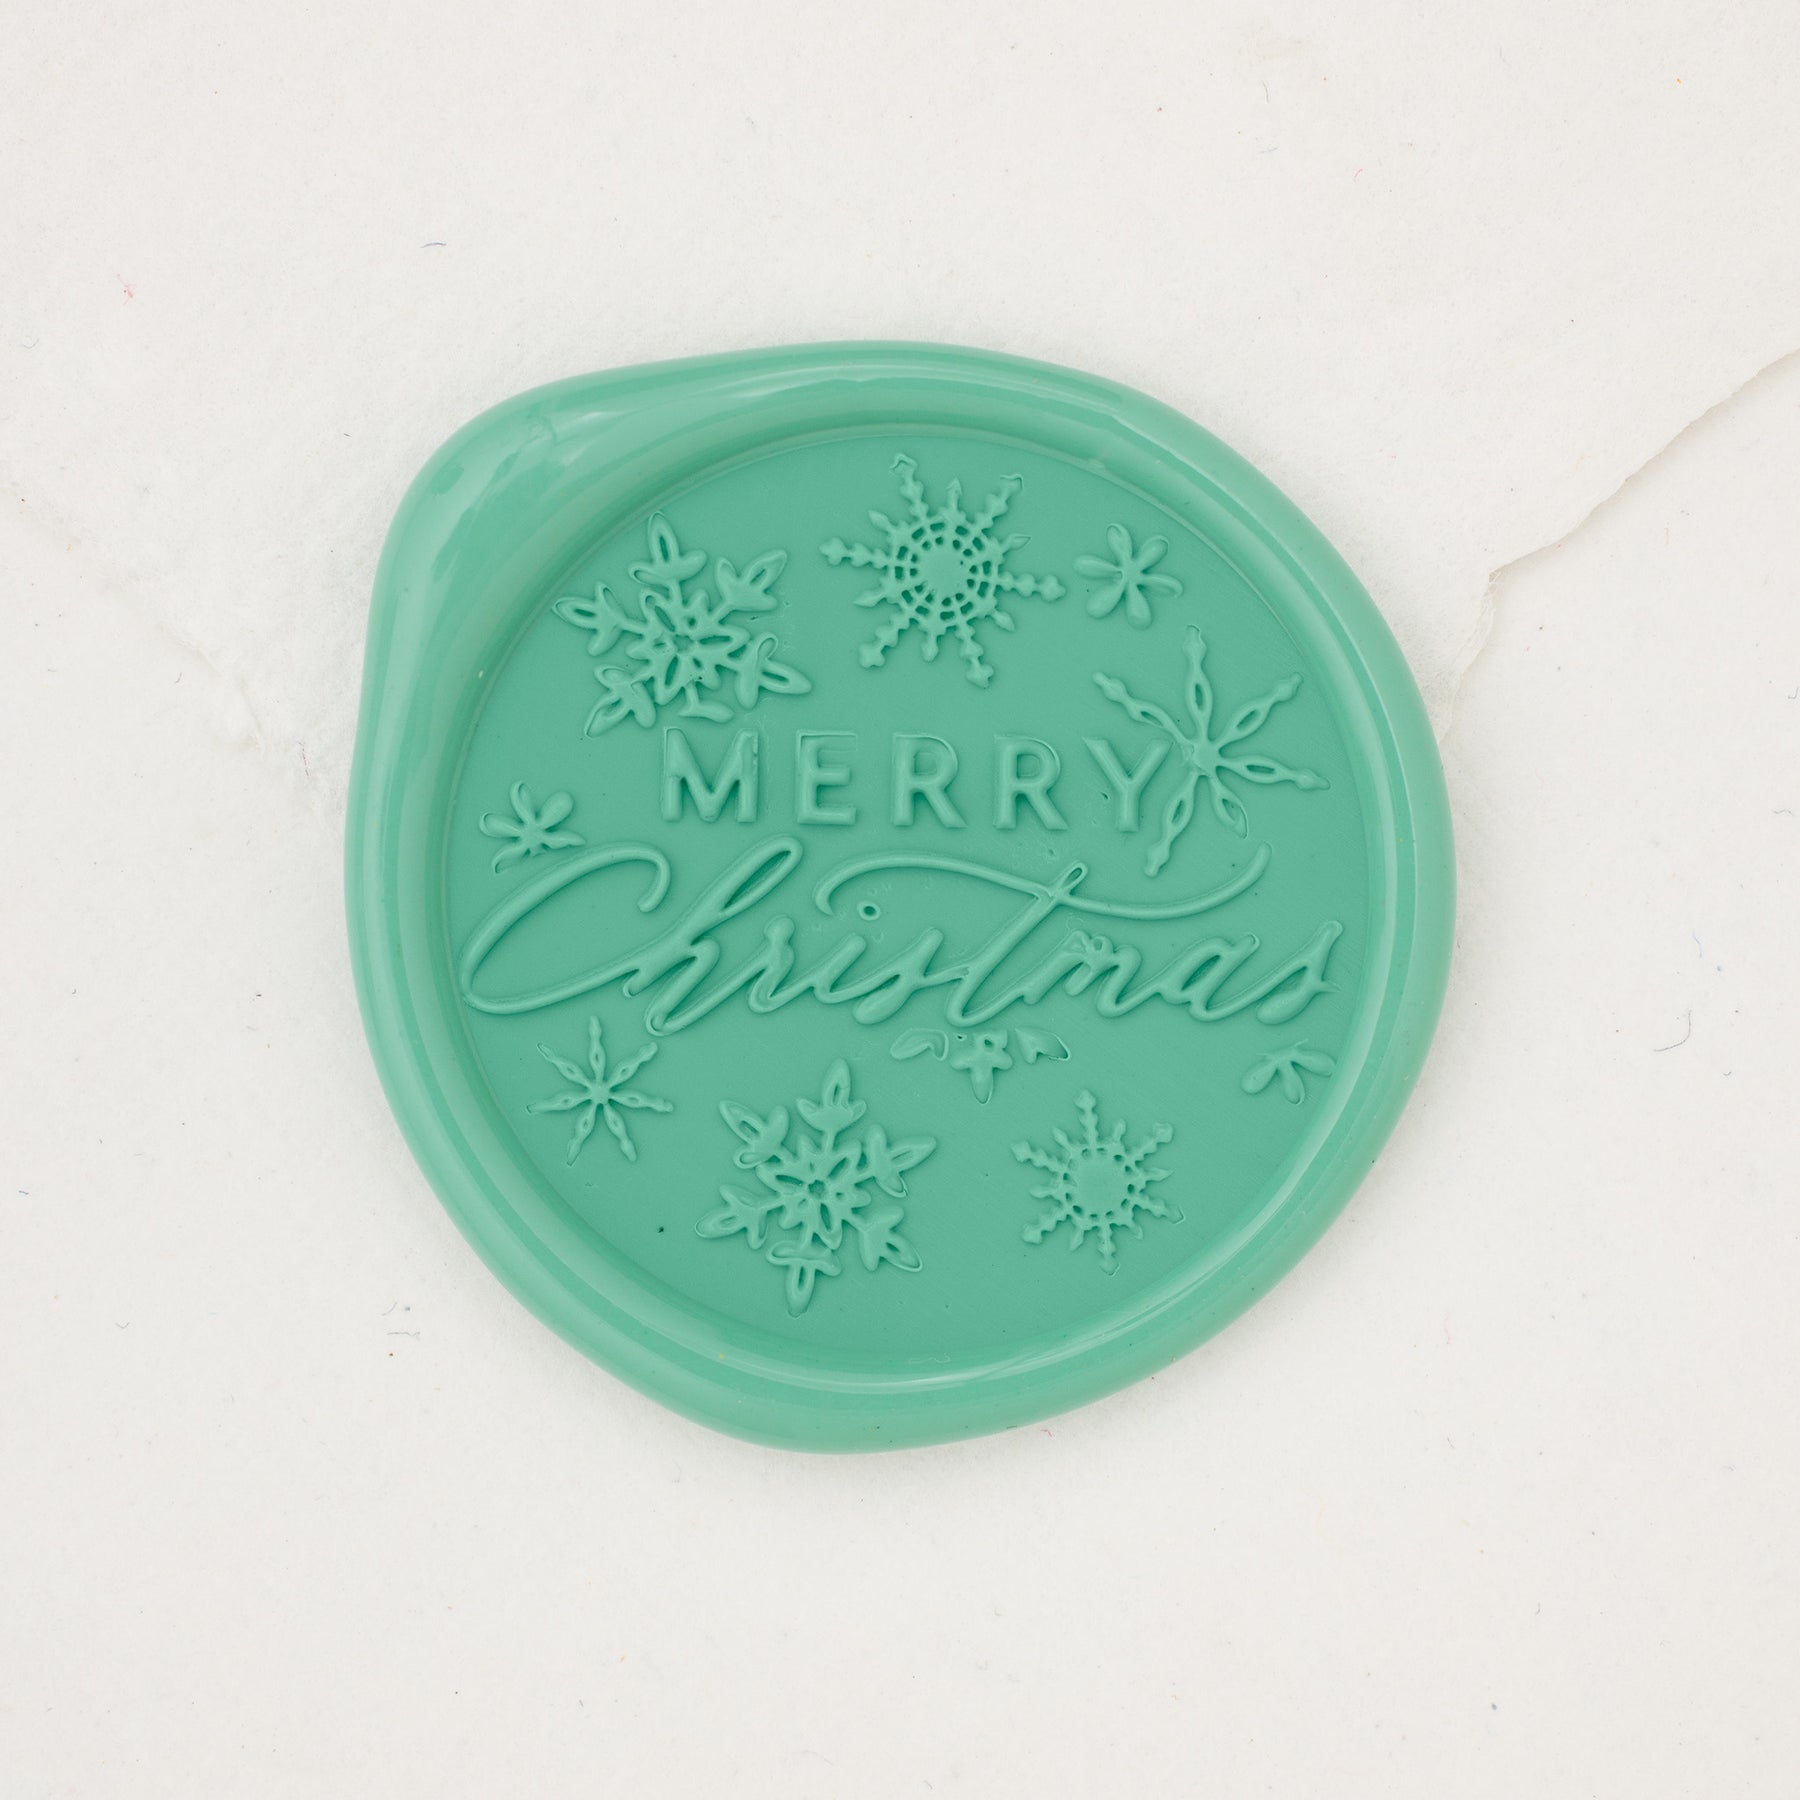 Keep Calm and Merry On - Christmas Collection Wax Seal Stamp by Get Ma -  GetMarked™ • Wax Seals & Stamping Goods HQ •